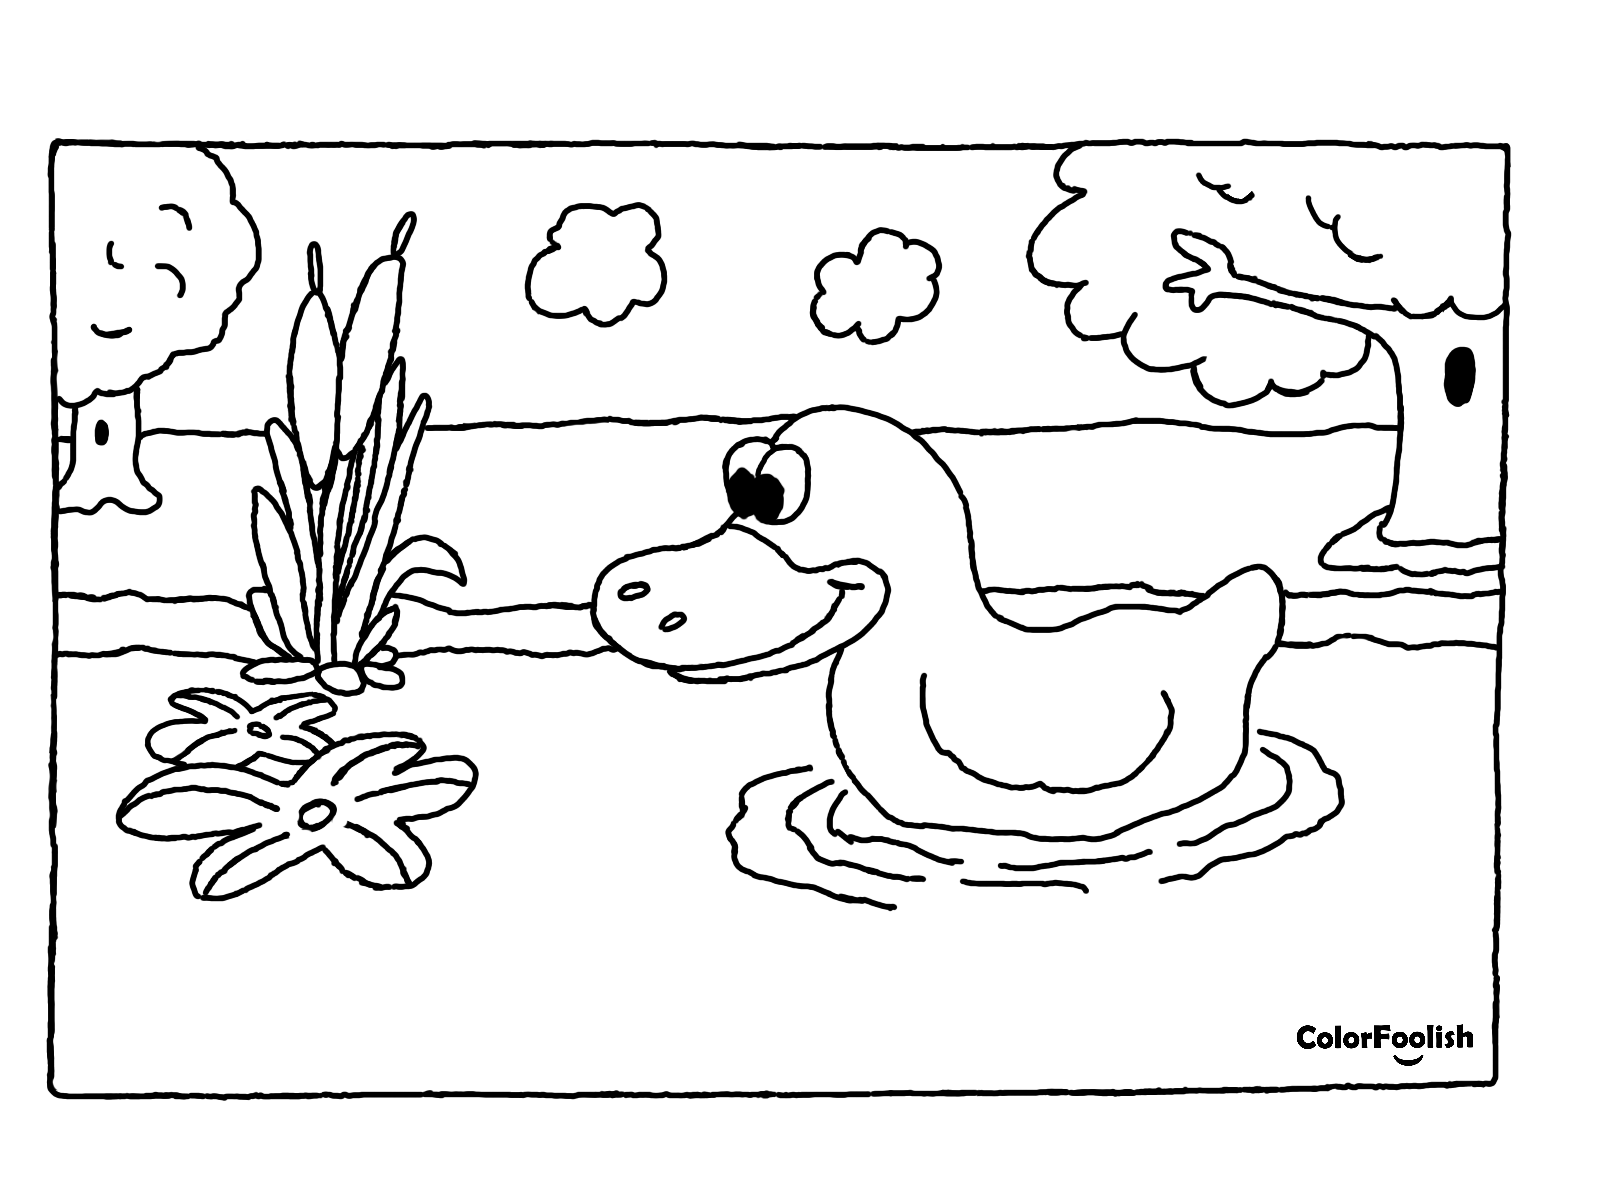 Coloring page of a duck in a pond